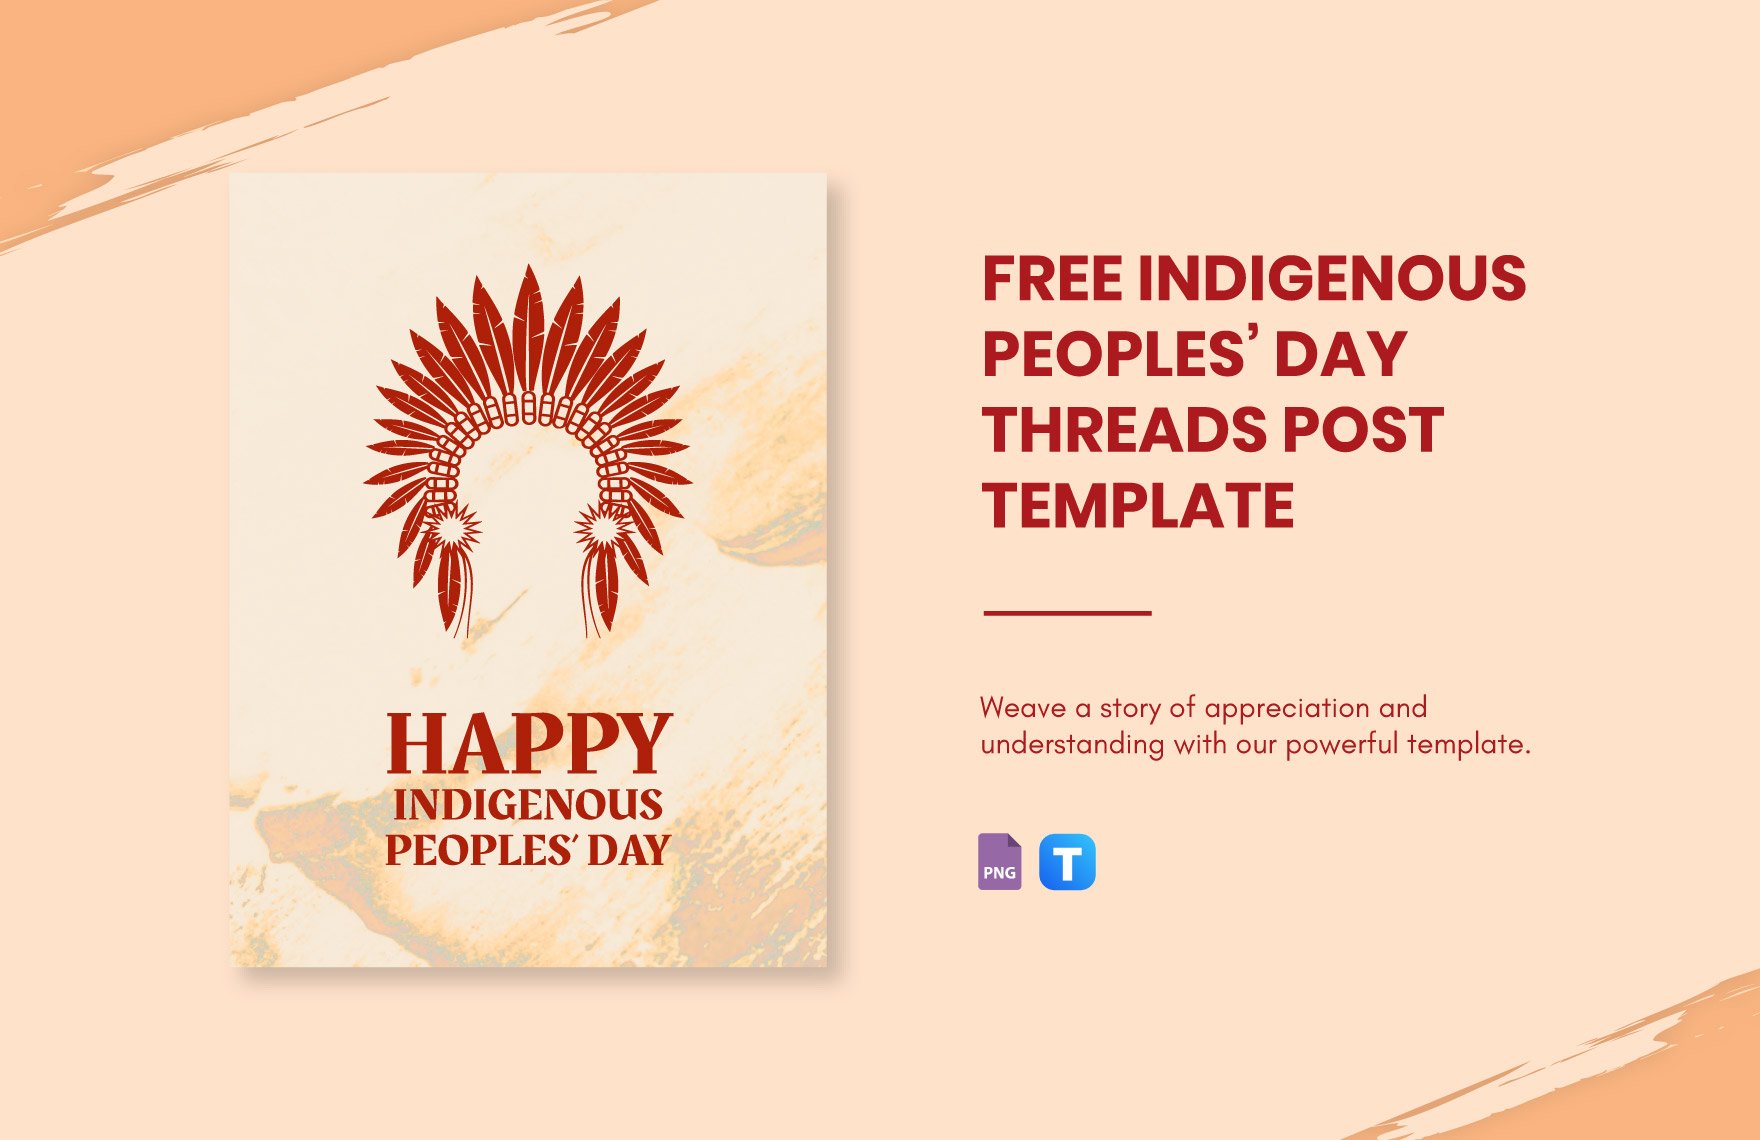 Indigenous Peoples' Day Threads Post Template